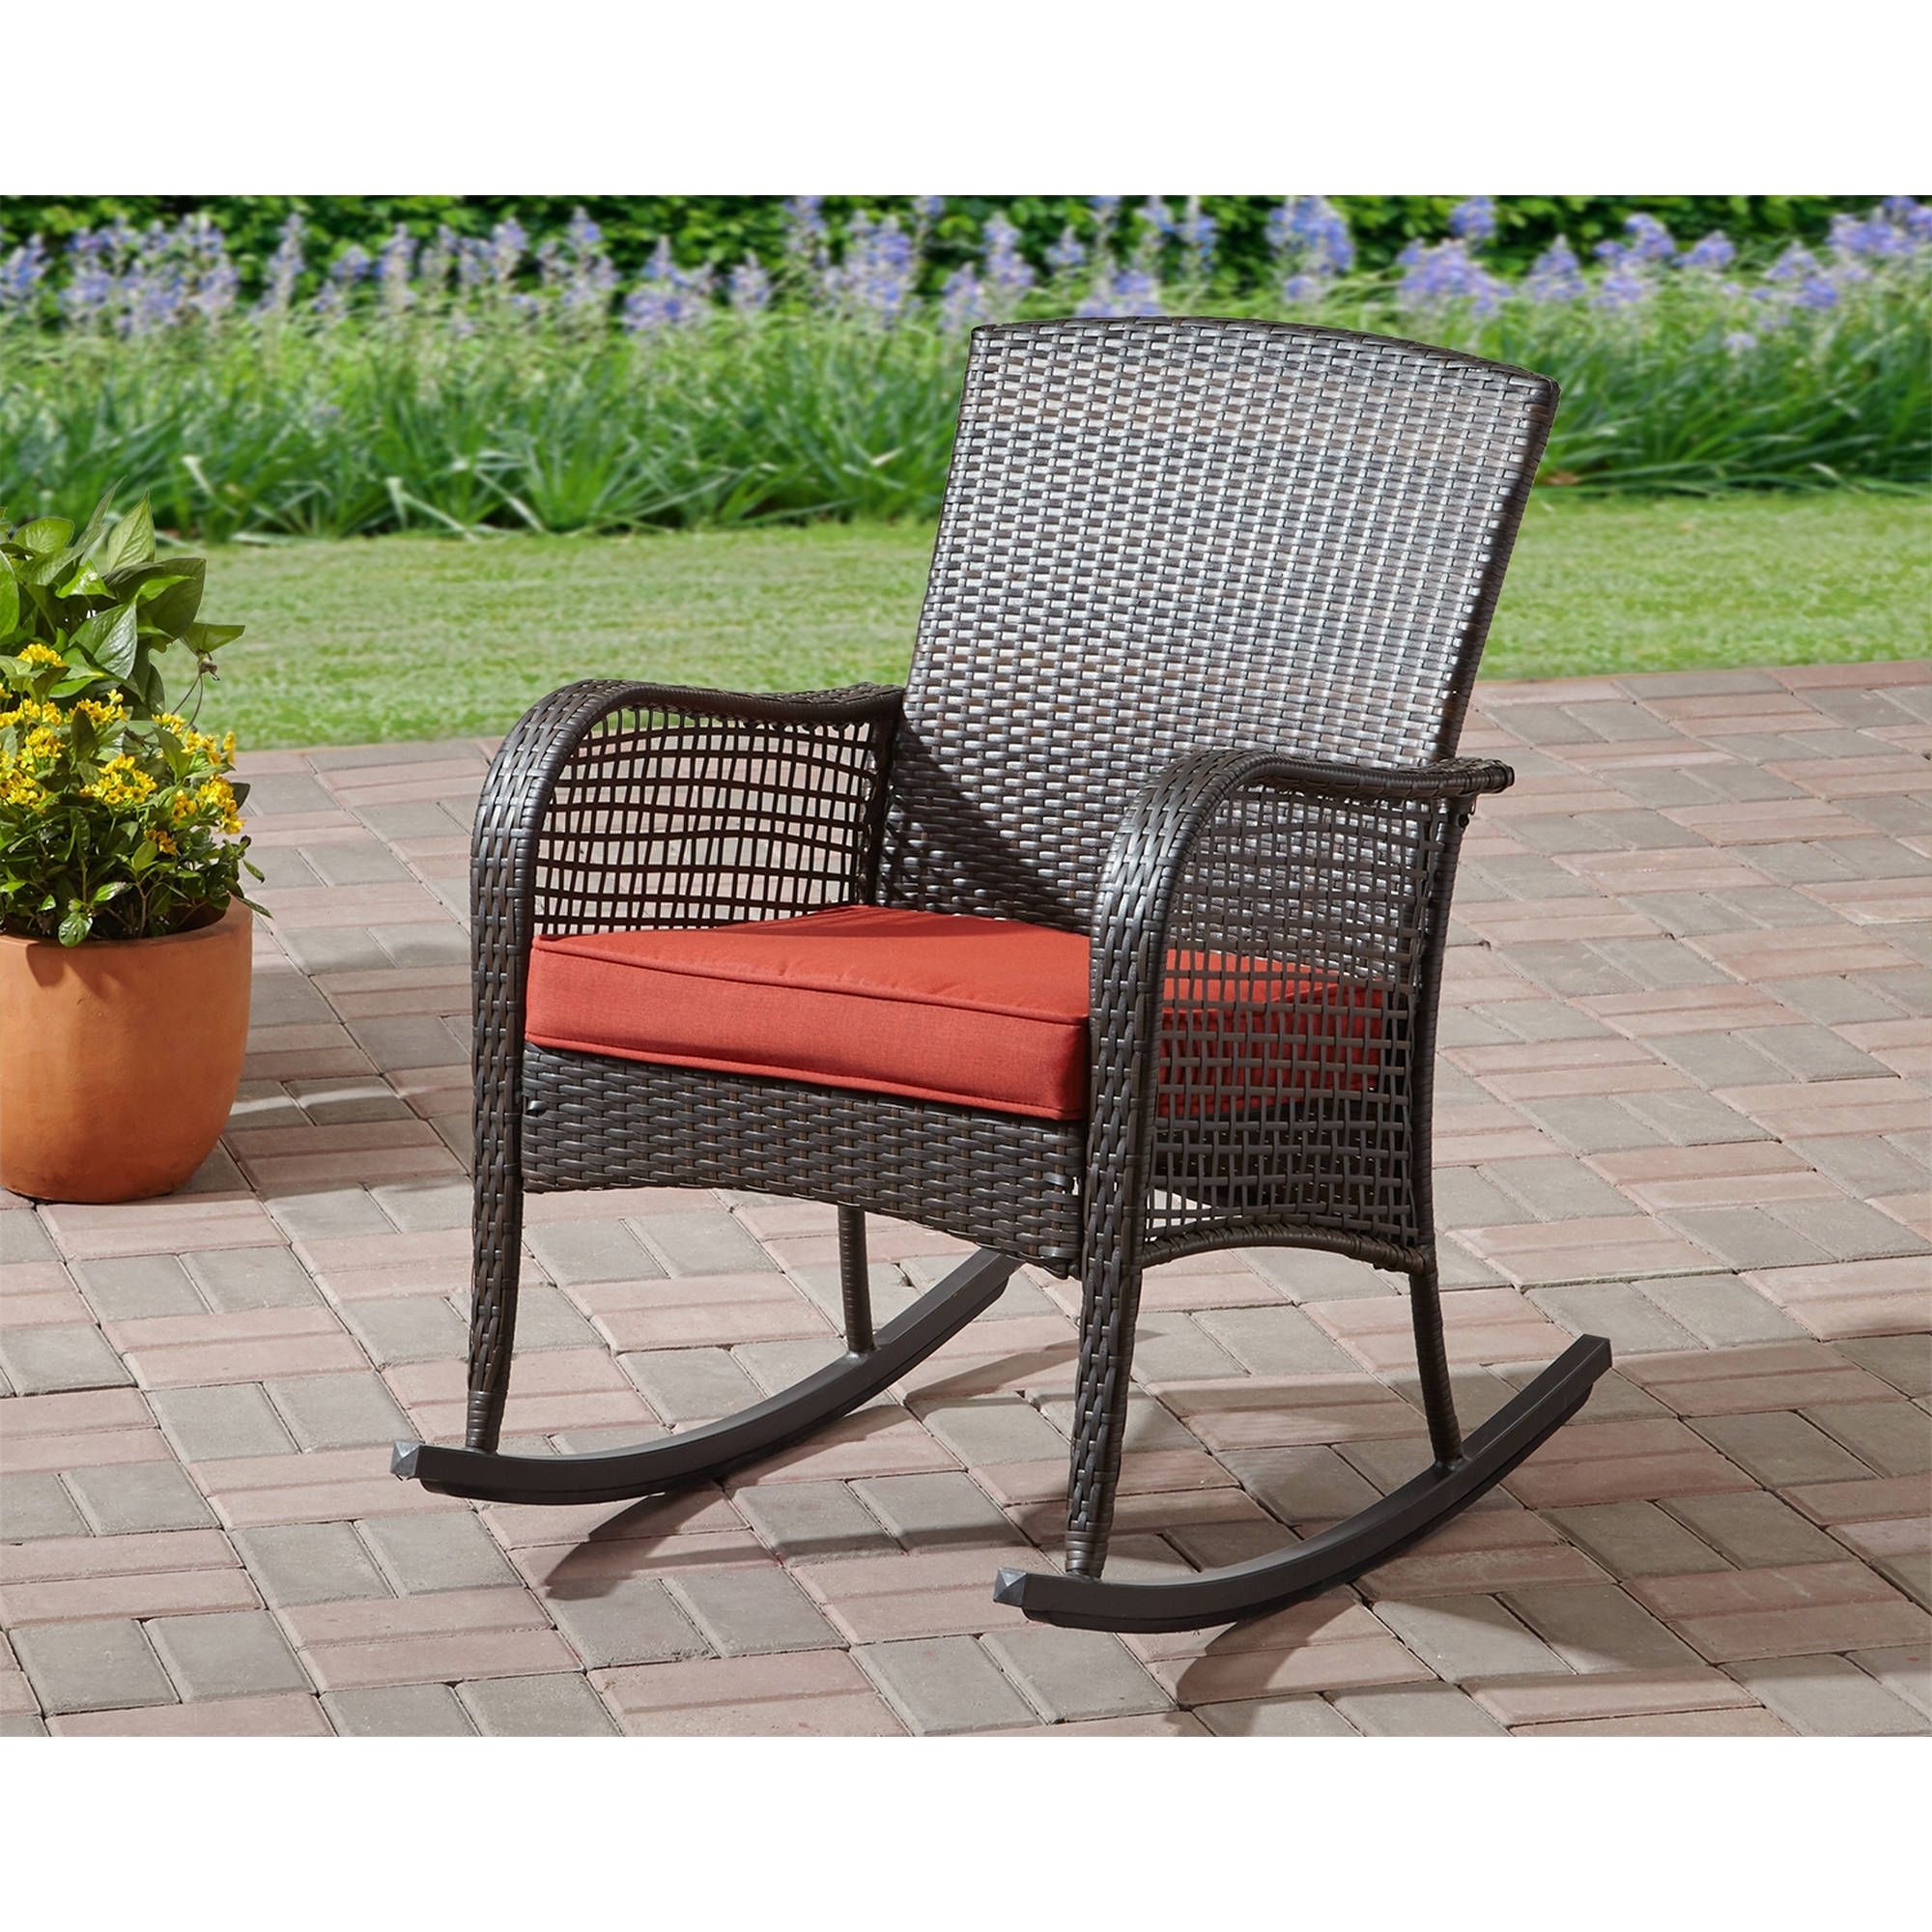 Rocking Chair Cushion Seat Wicker Steel Frame Outdoor Patio Deck For Best And Newest Outdoor Wicker Rocking Chairs With Cushions (View 7 of 15)